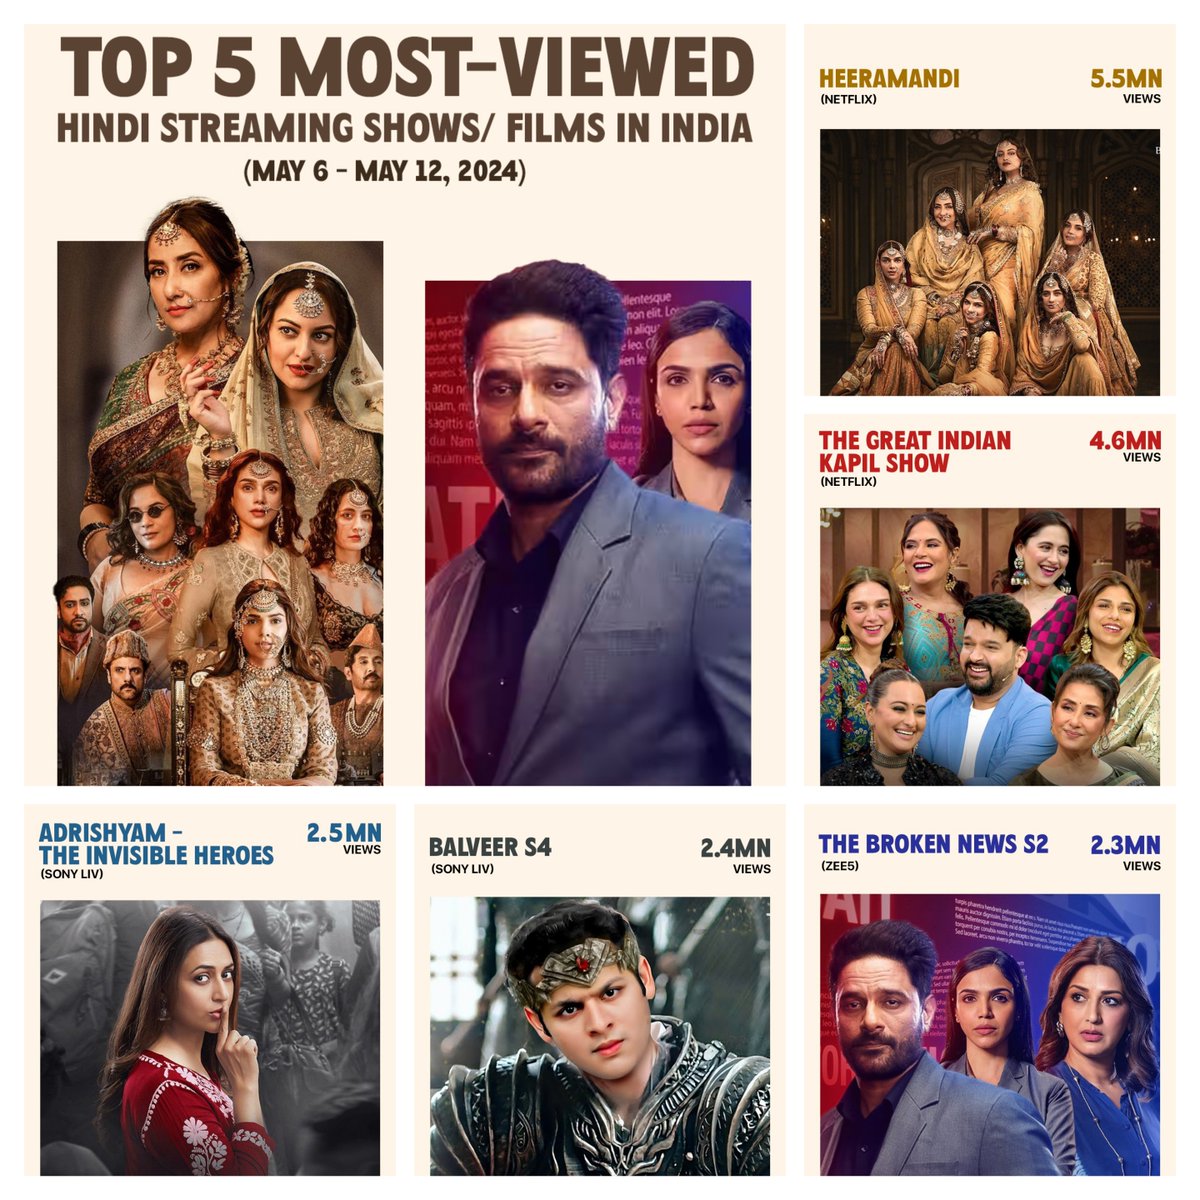 From 'Heeramandi' to 'The Broken News', here are the most-viewed shows of the week. Read the full article on our website! #FilmCompanion